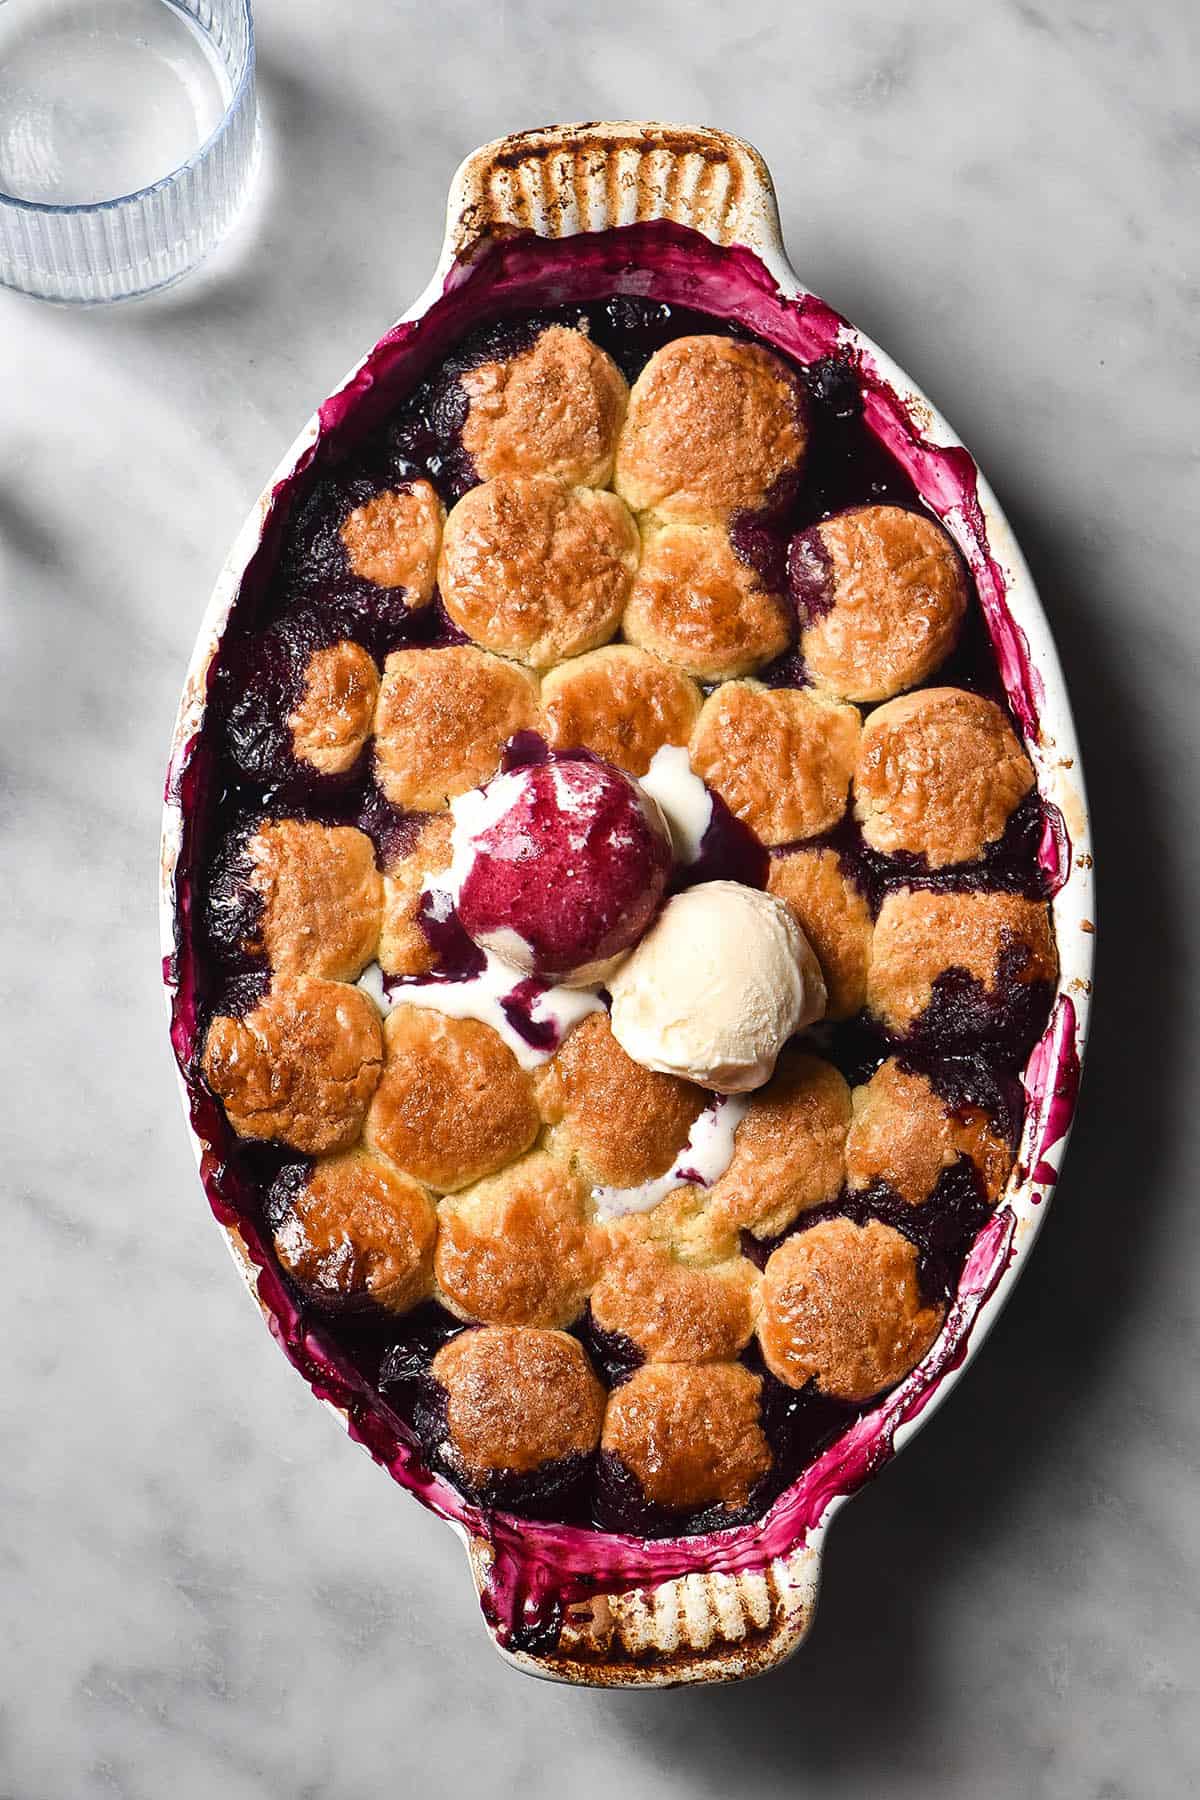 An aerial image of a gluten free blueberry cobbler on a white marble table. The cobbler is topped with two scoops of vanilla ice cream, and one has been covered in deep purple blueberry juices